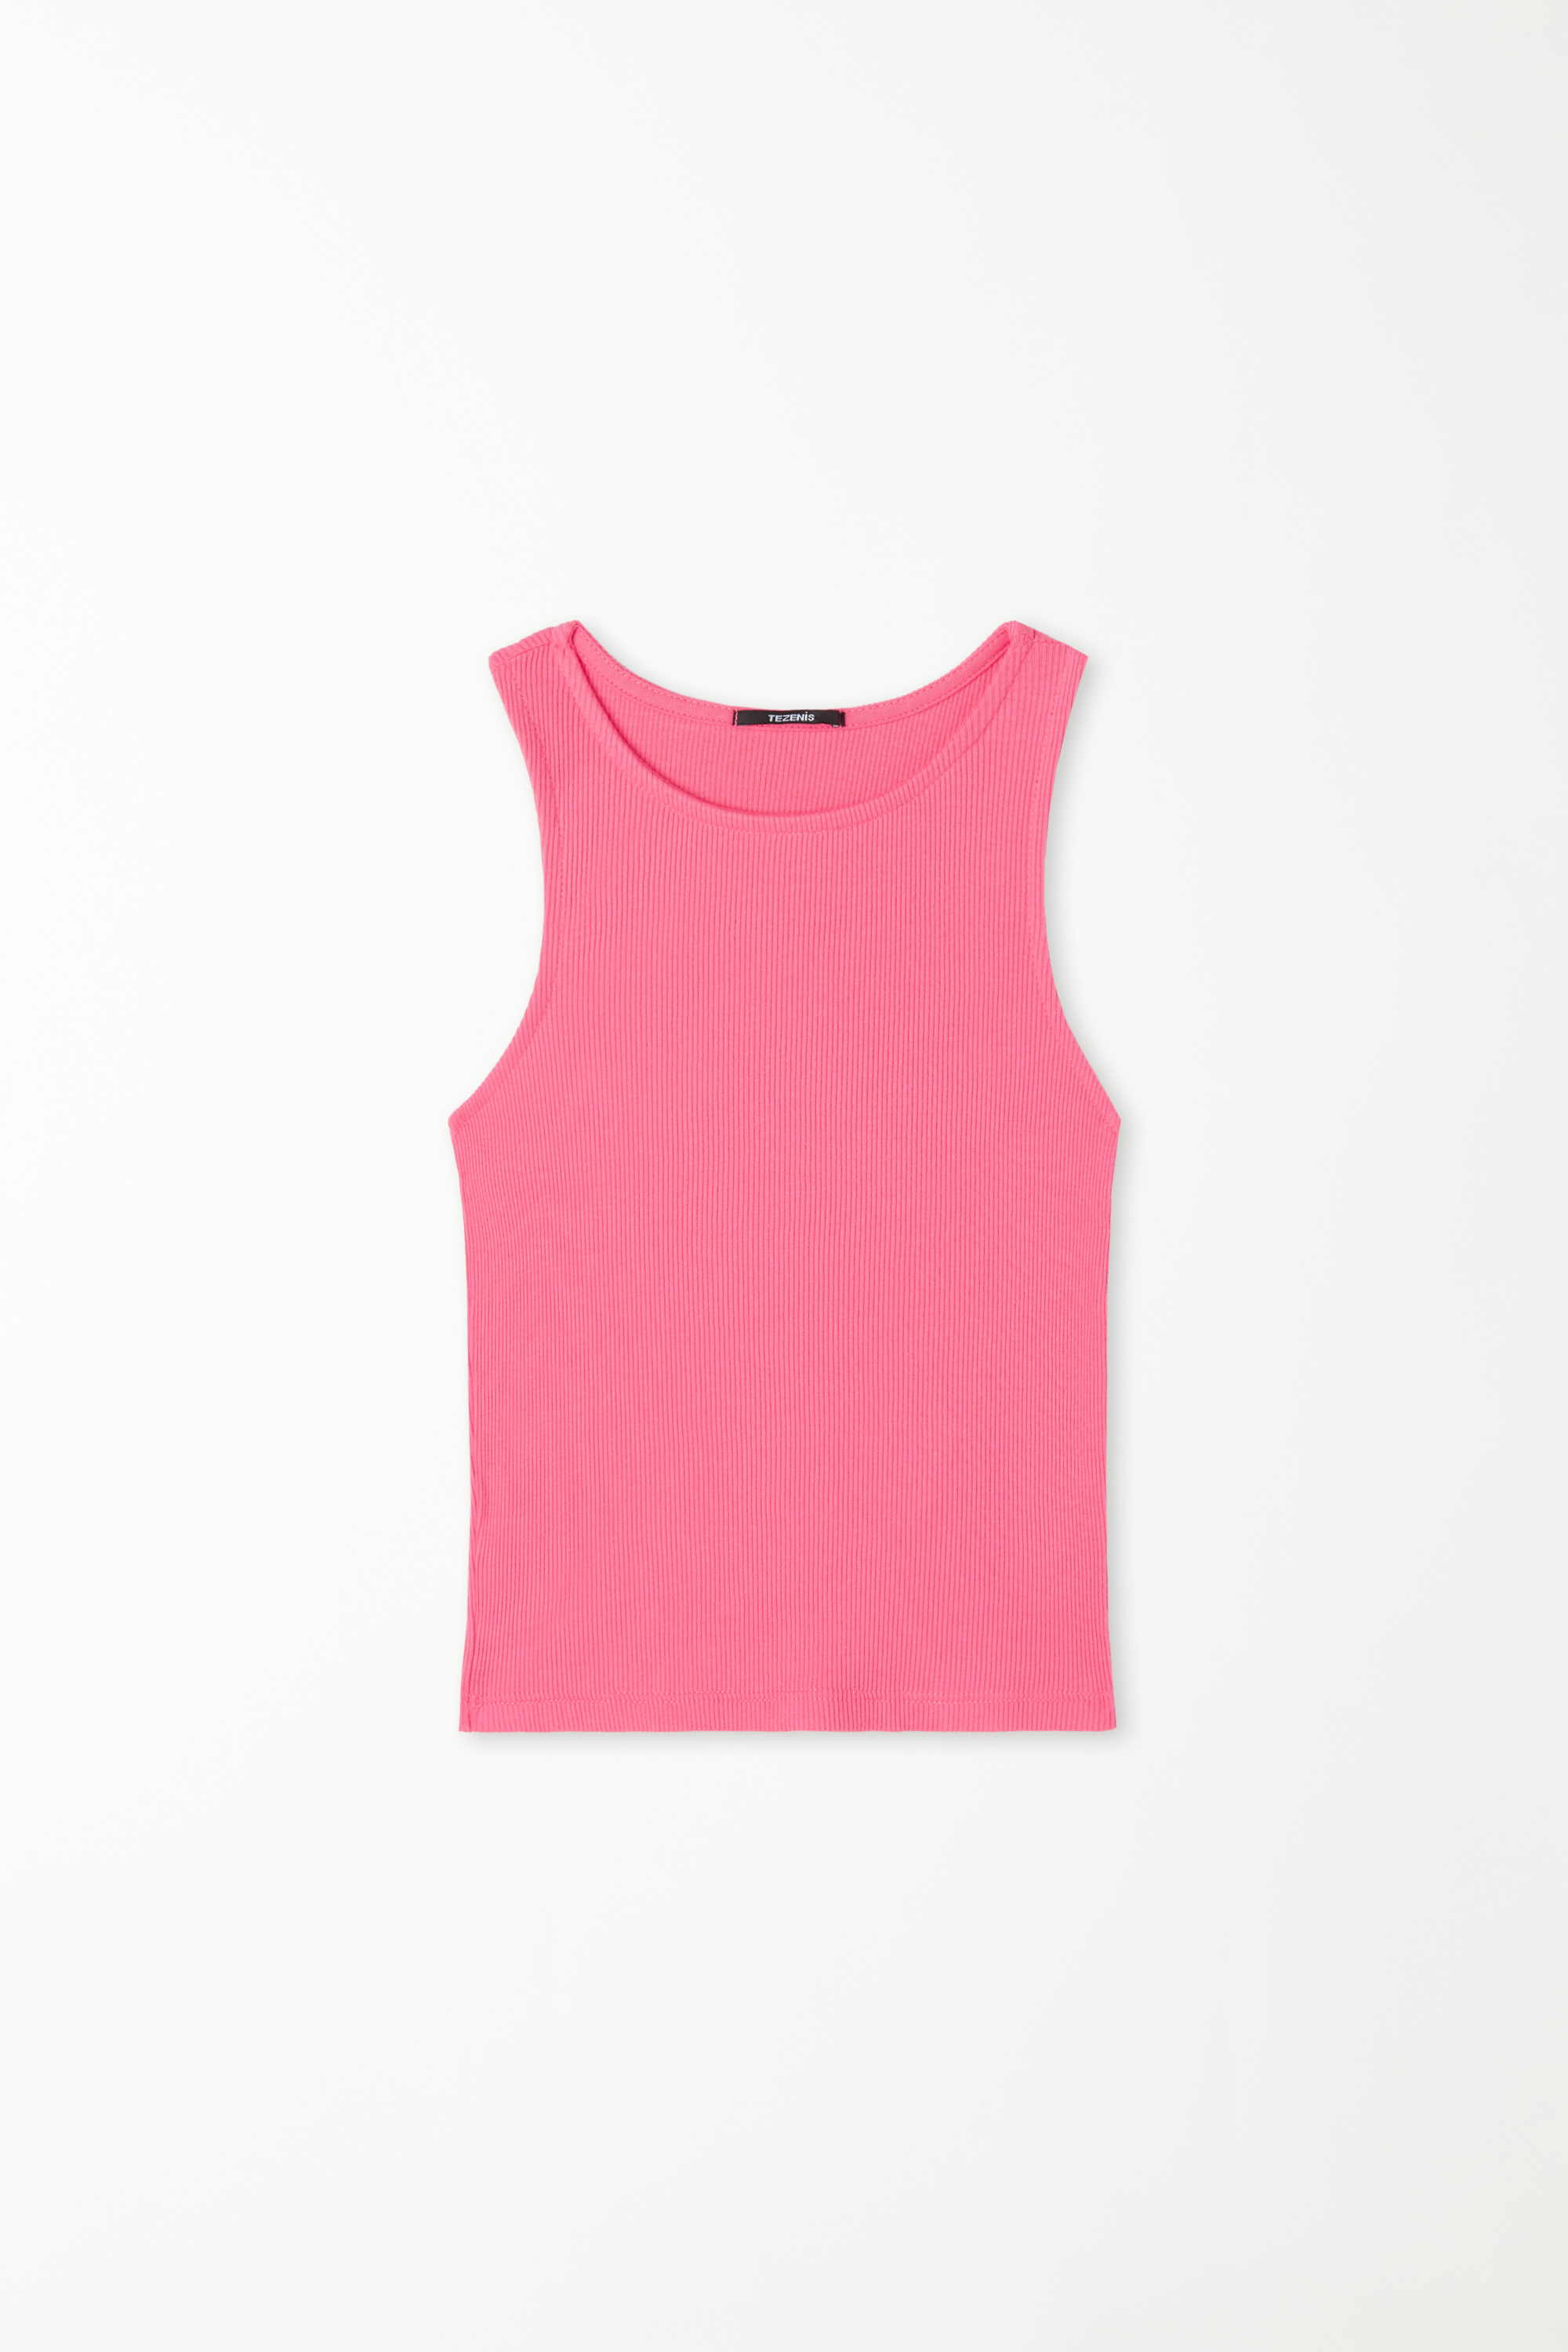 Girls’ Ribbed Camisole with Wide Shoulder Straps